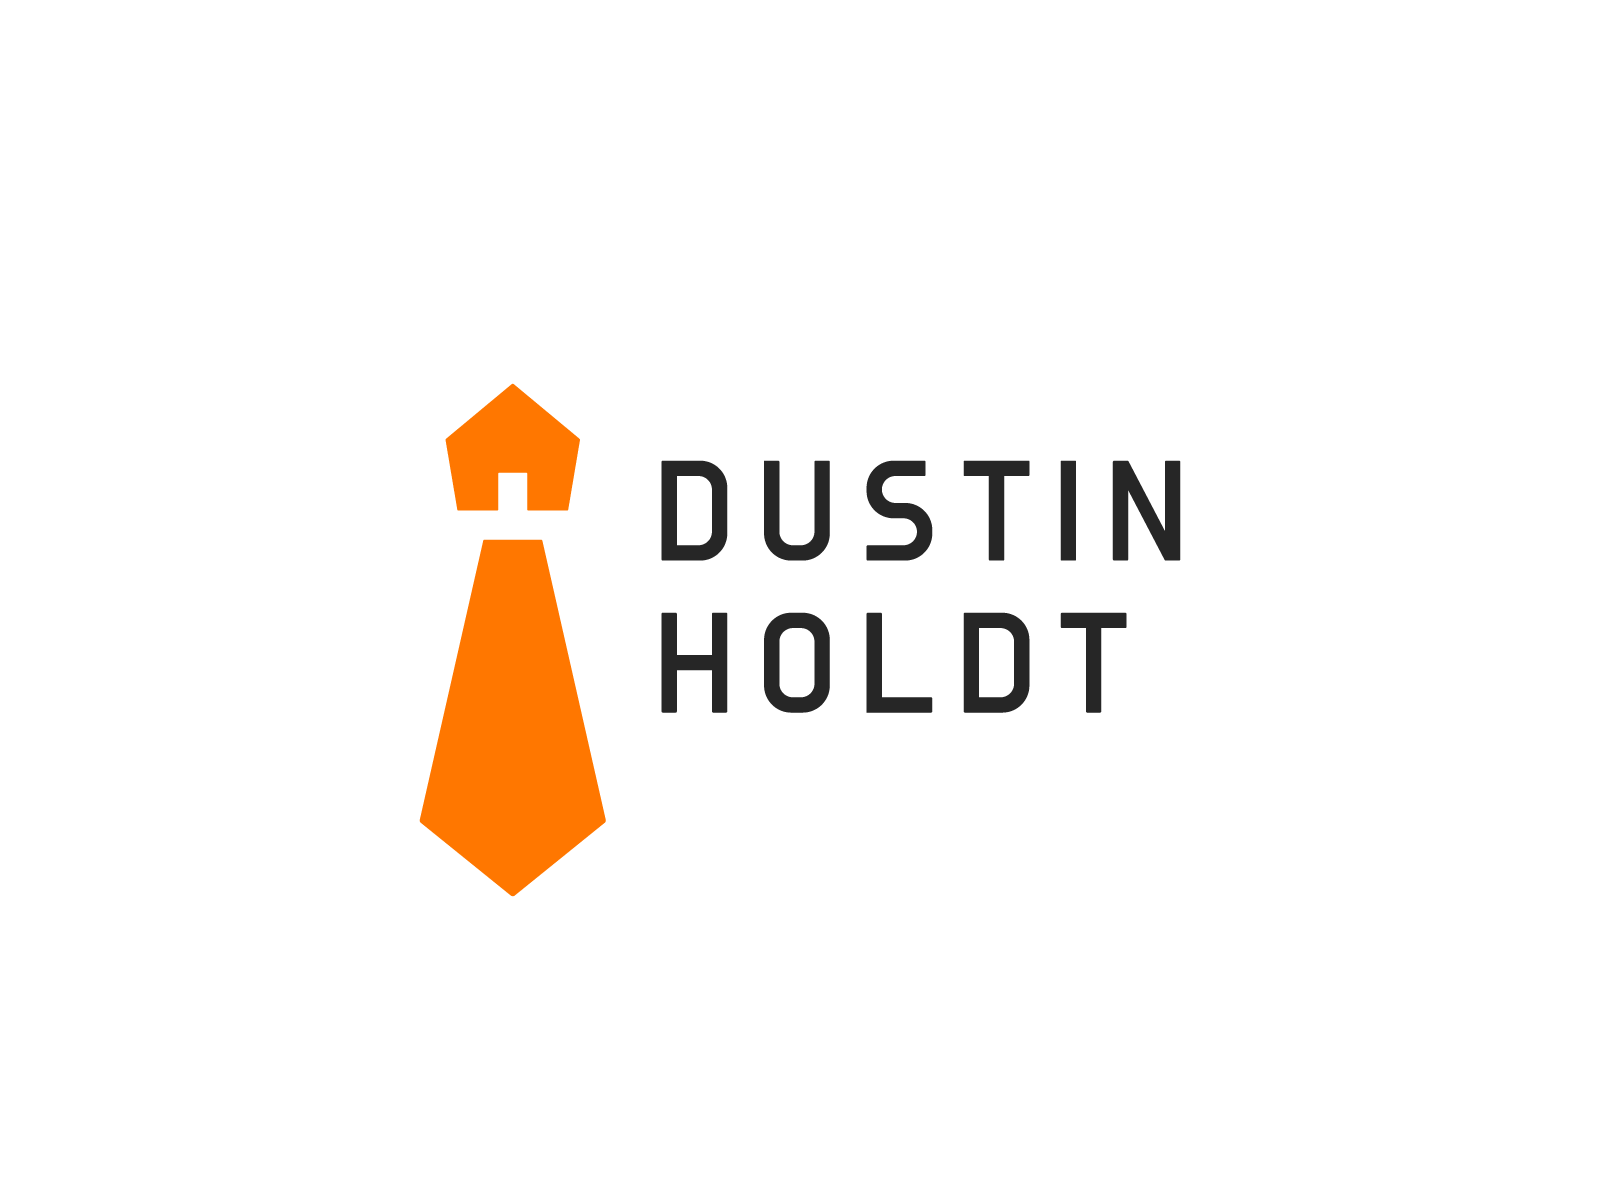 Dustin Holdt agent architecture branding business design house logo illustration immovables logo logo logo design logo designs logo mark logomark logos logotype minimal purchase logo sale house typography vector